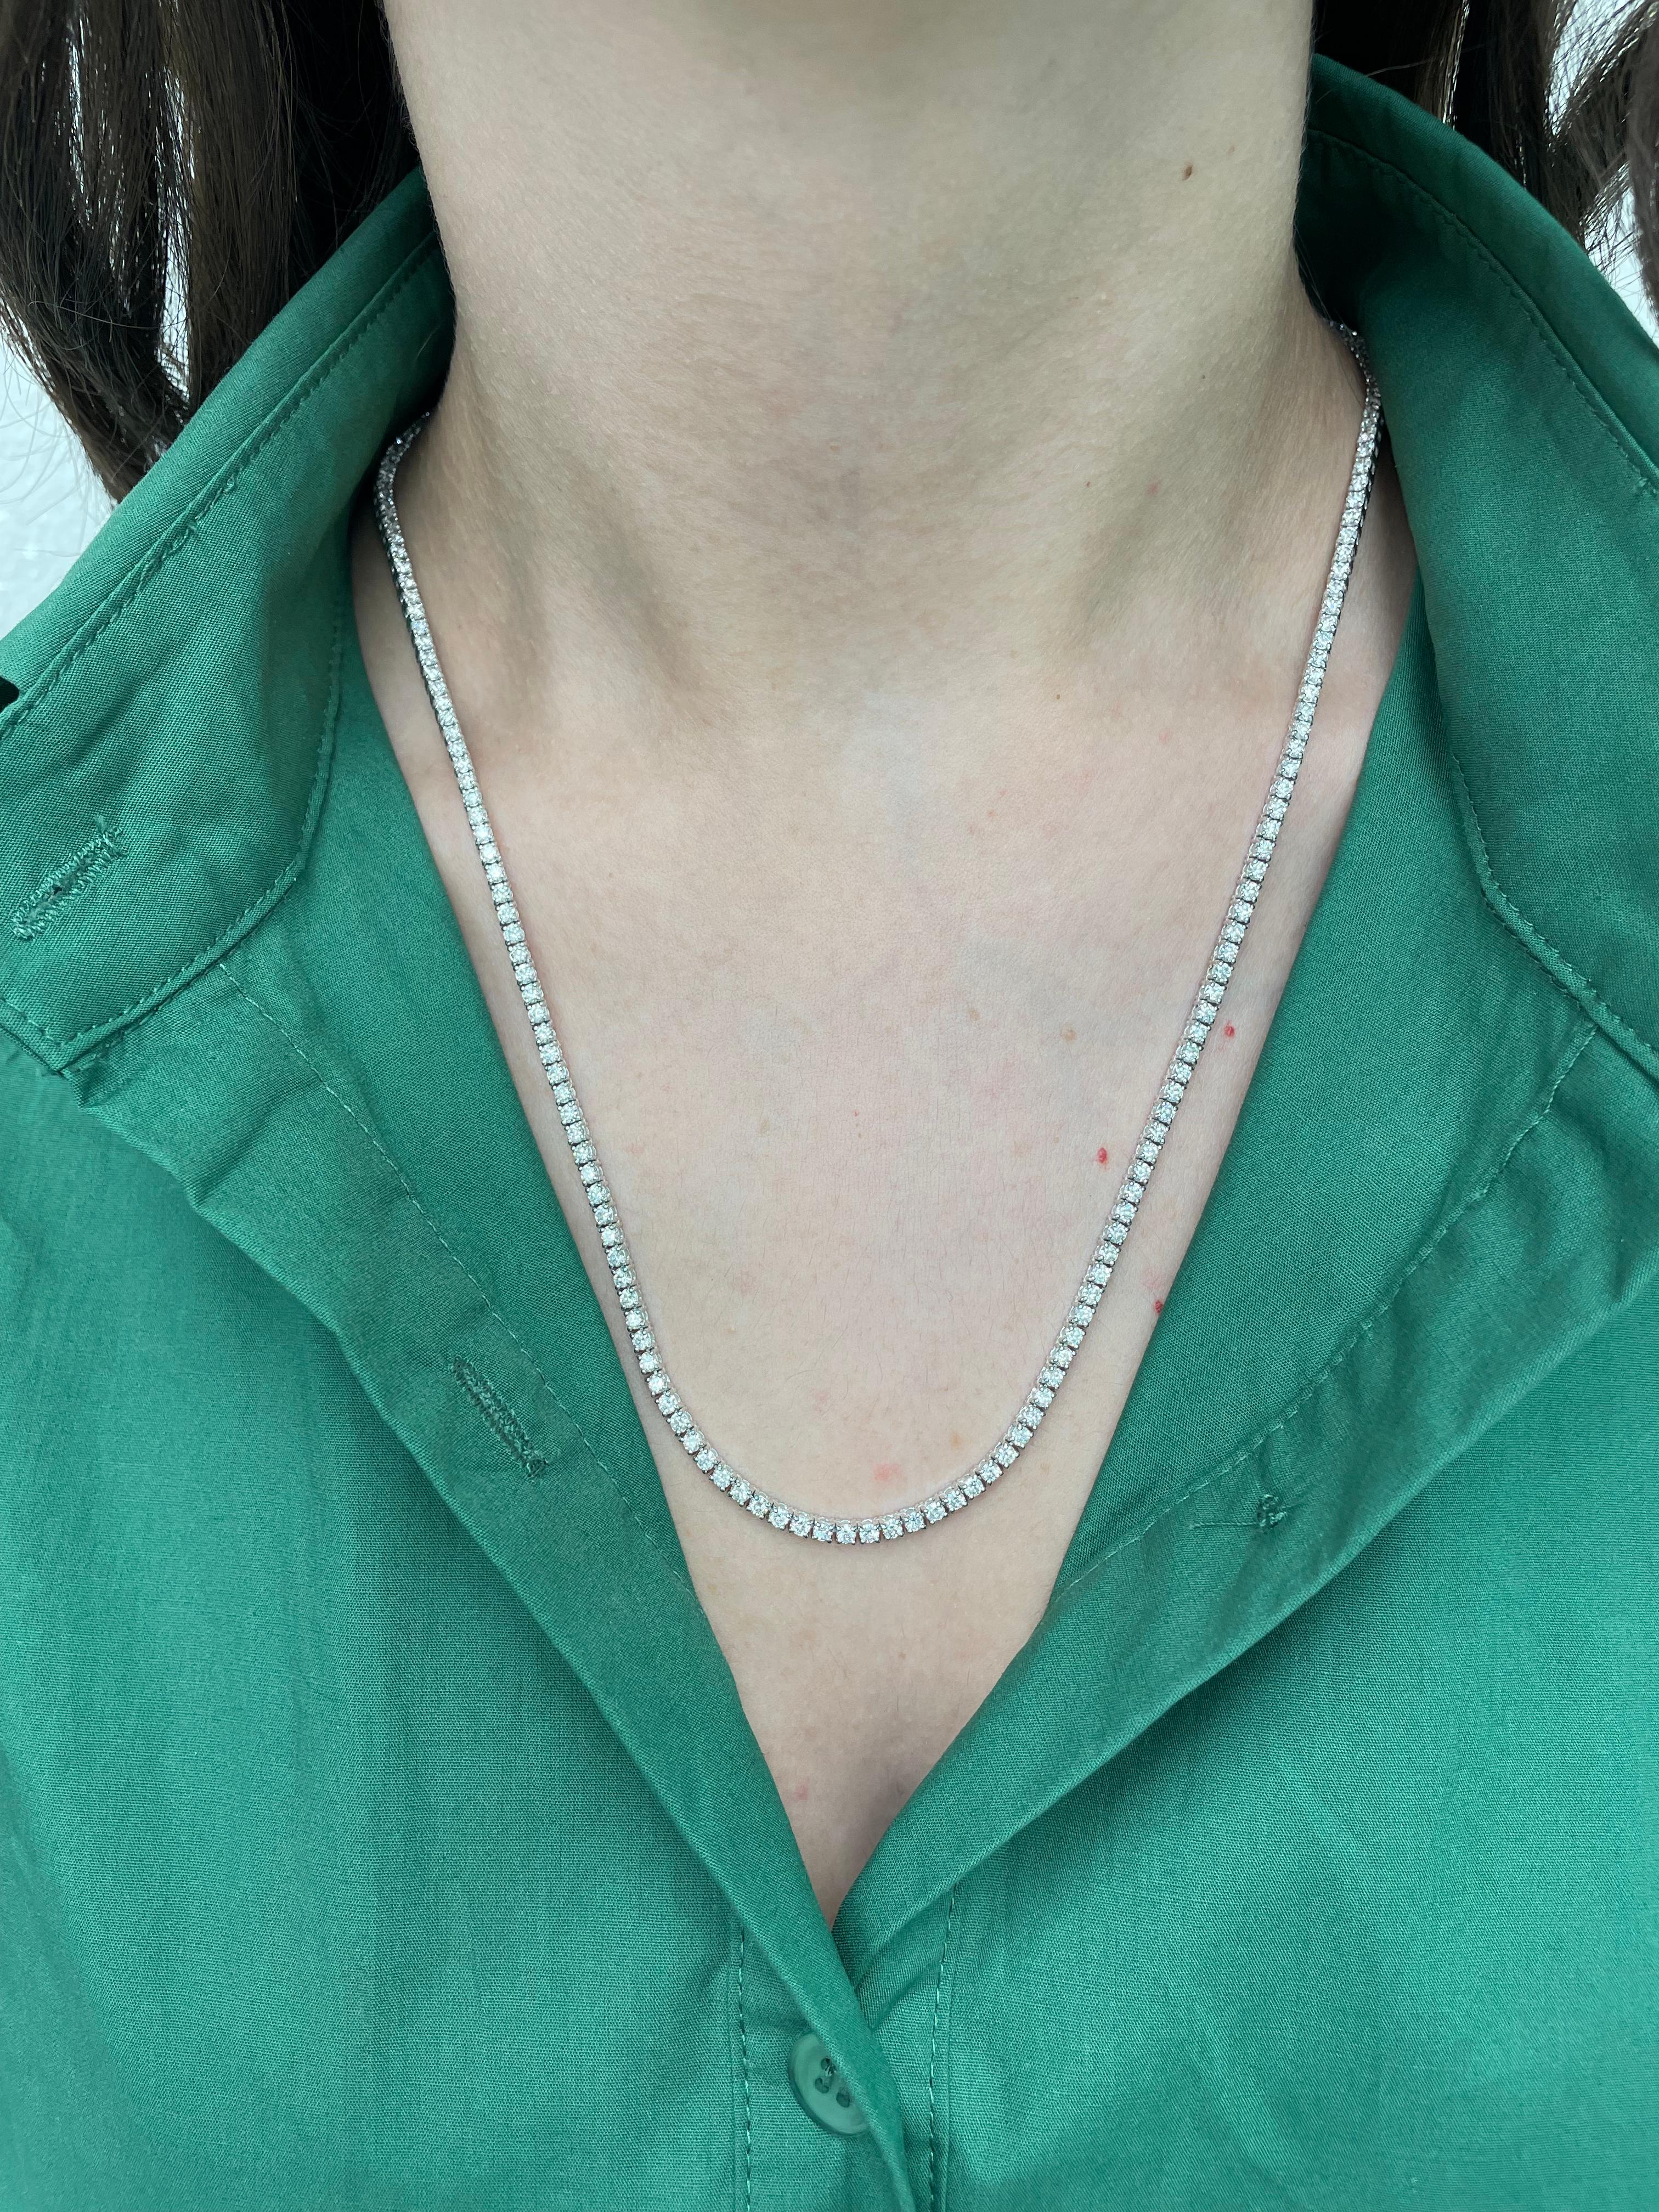 Beautiful and classic long diamond tennis necklace, by Alexander Beverly Hills.
9.57 carats of round brilliant diamonds, approximately D-F color and SI clarity. 14k white gold, 25.36 grams, prong set, 22in.
Accommodated with an up-to-date appraisal